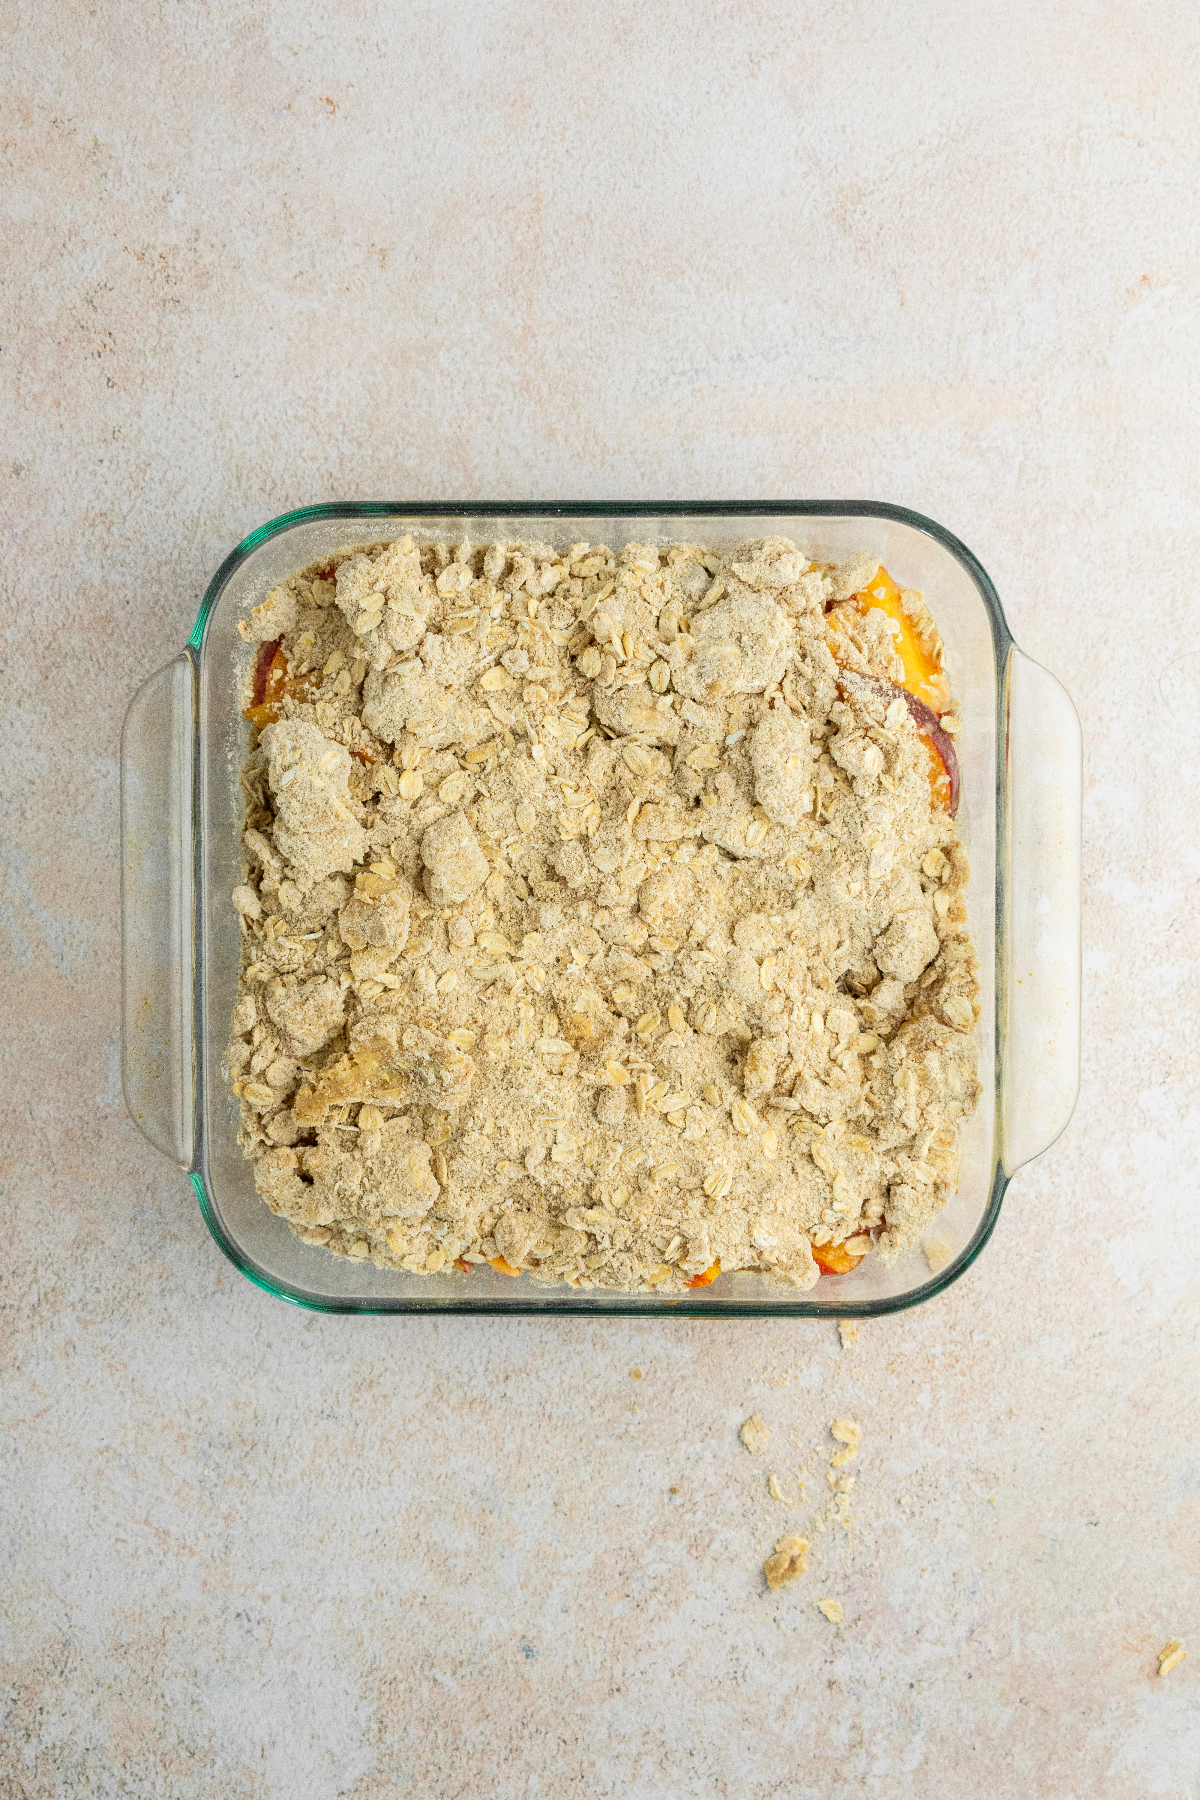 Crisp topping over the peach filling in a baking pan.